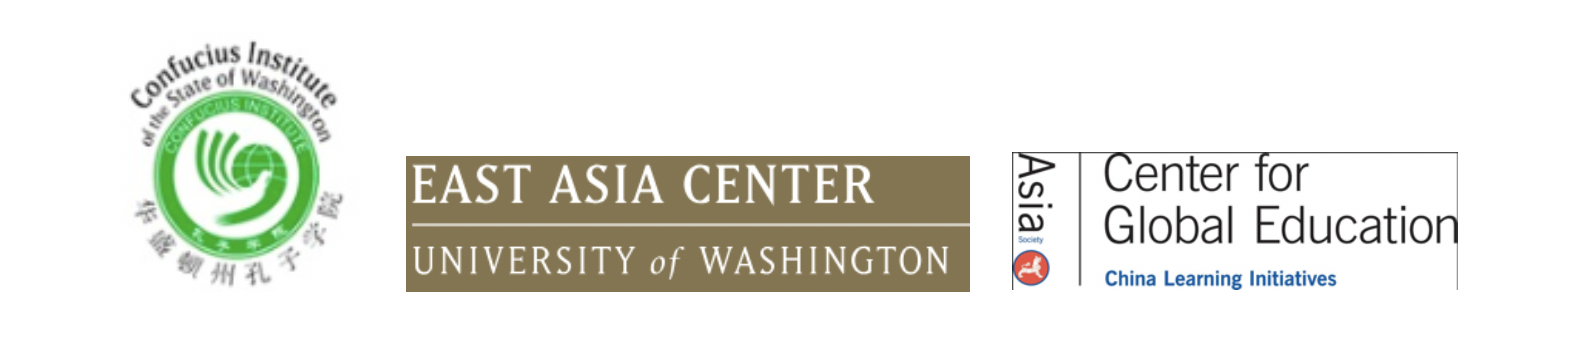 2019 Summer Workshop: Go Real: Creating Relevant and Engaging Learning Experiences for K-12 Chinese Language Learners @ Communications Building (CMU) 120, University of Washington, Seattle, WA